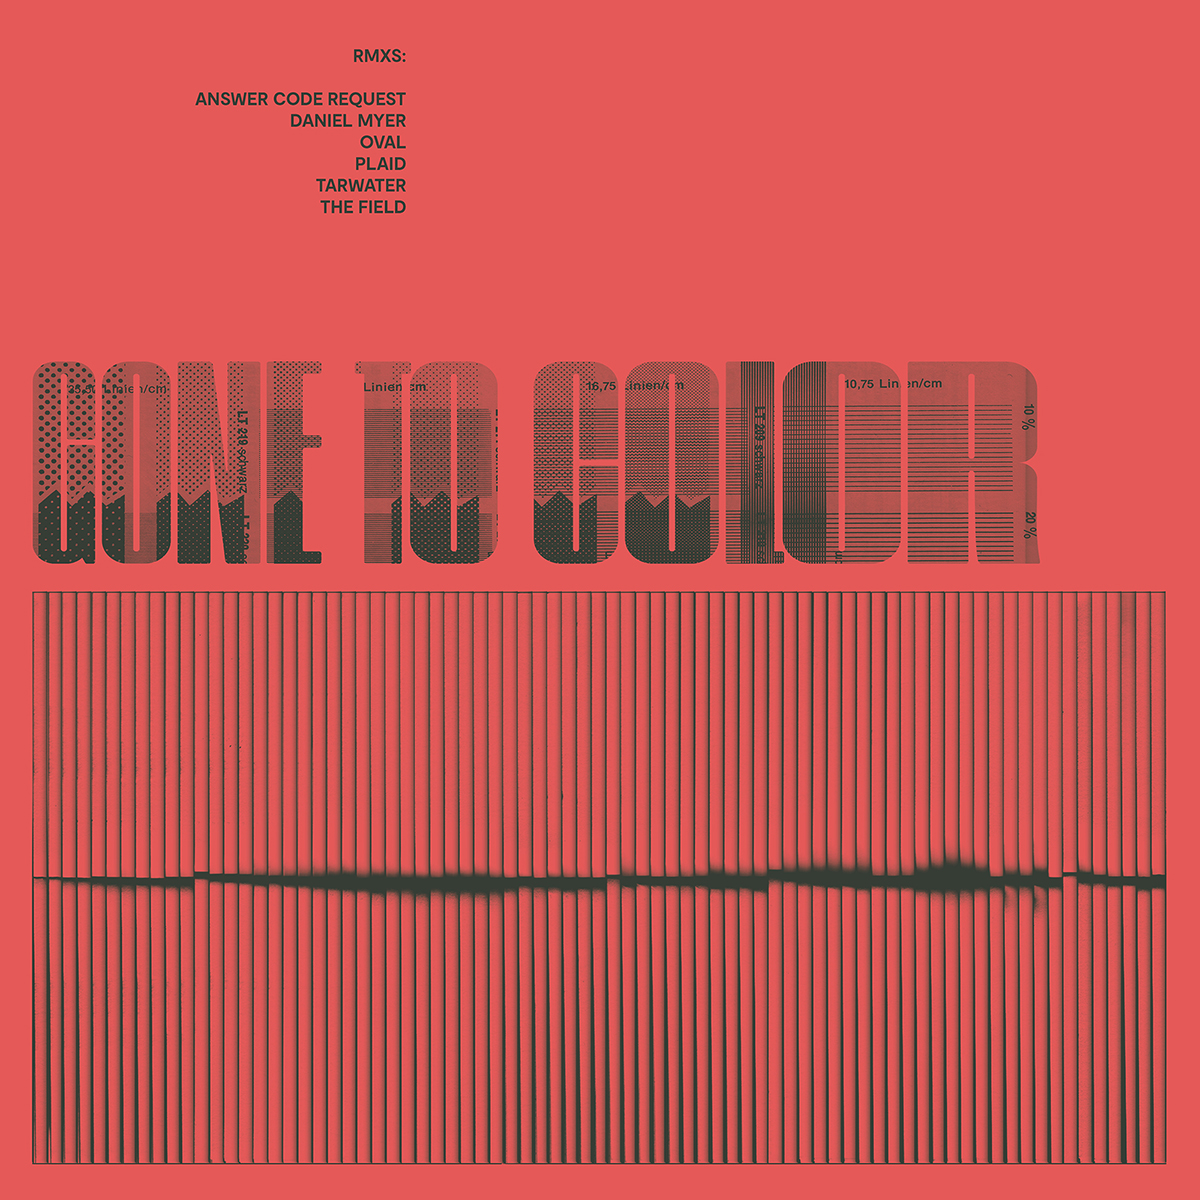 Gone To Color announces new remix album, featuring Plaid, The Field, Oval, Tarwater and more, out Jan. 27